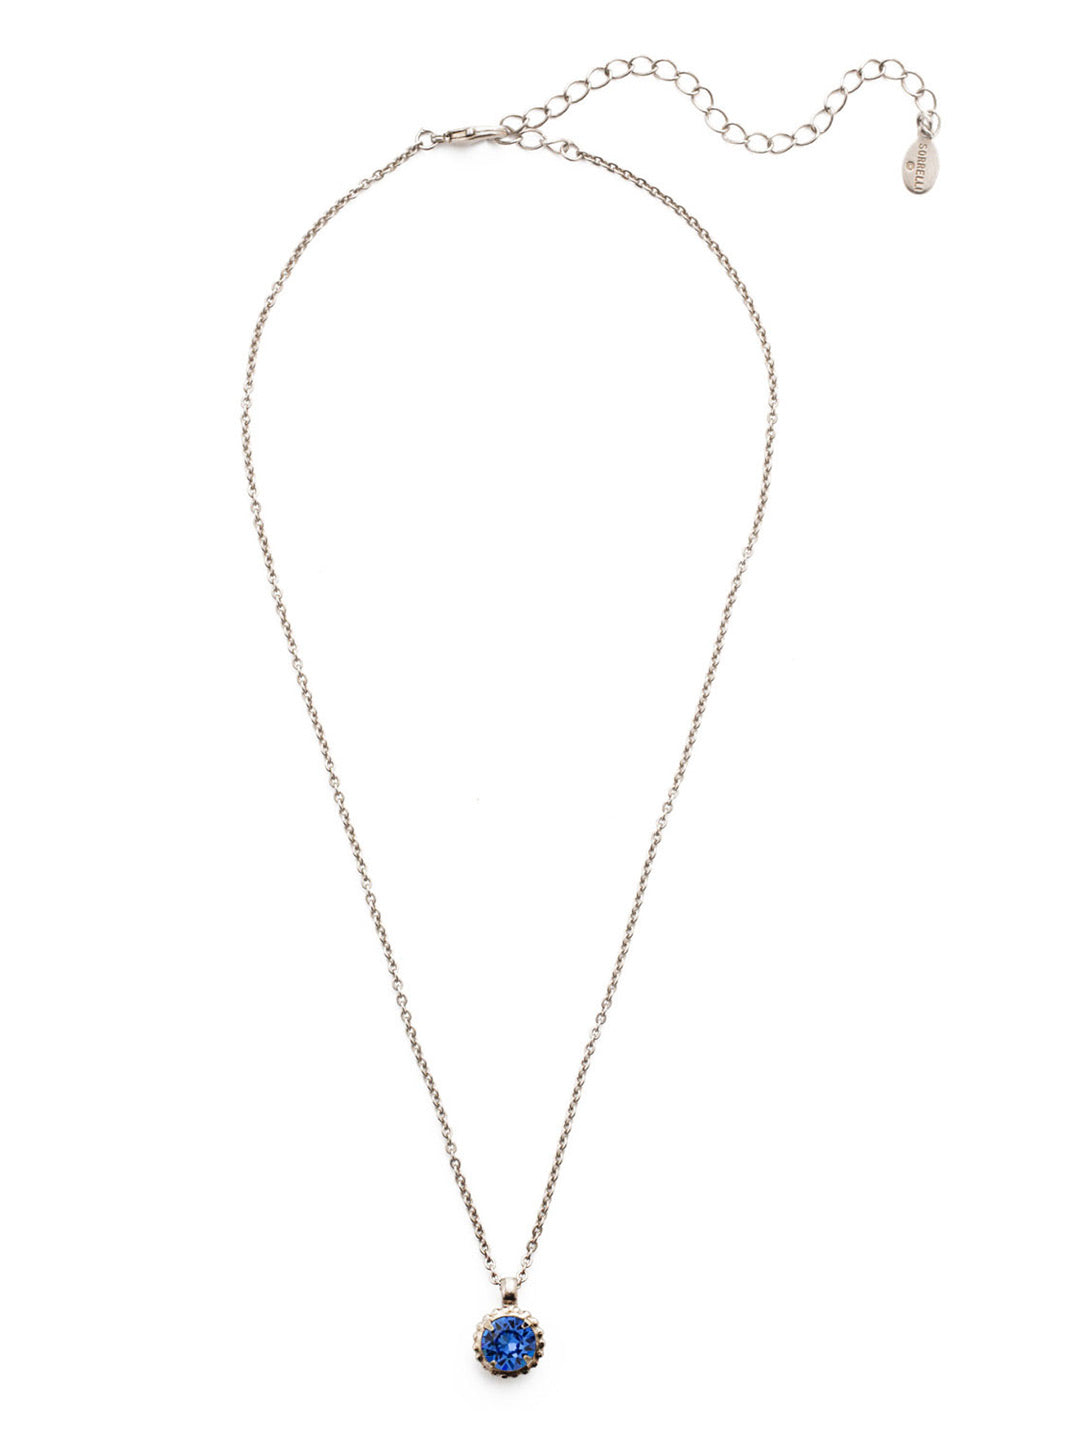 Simplicity Pendant Necklace - NBY38ASSAP - <p>Perfect for any day! The Simplicity Pendant Necklace features a round cut crystal with vintage edging. From Sorrelli's Sapphire collection in our Antique Silver-tone finish.</p>